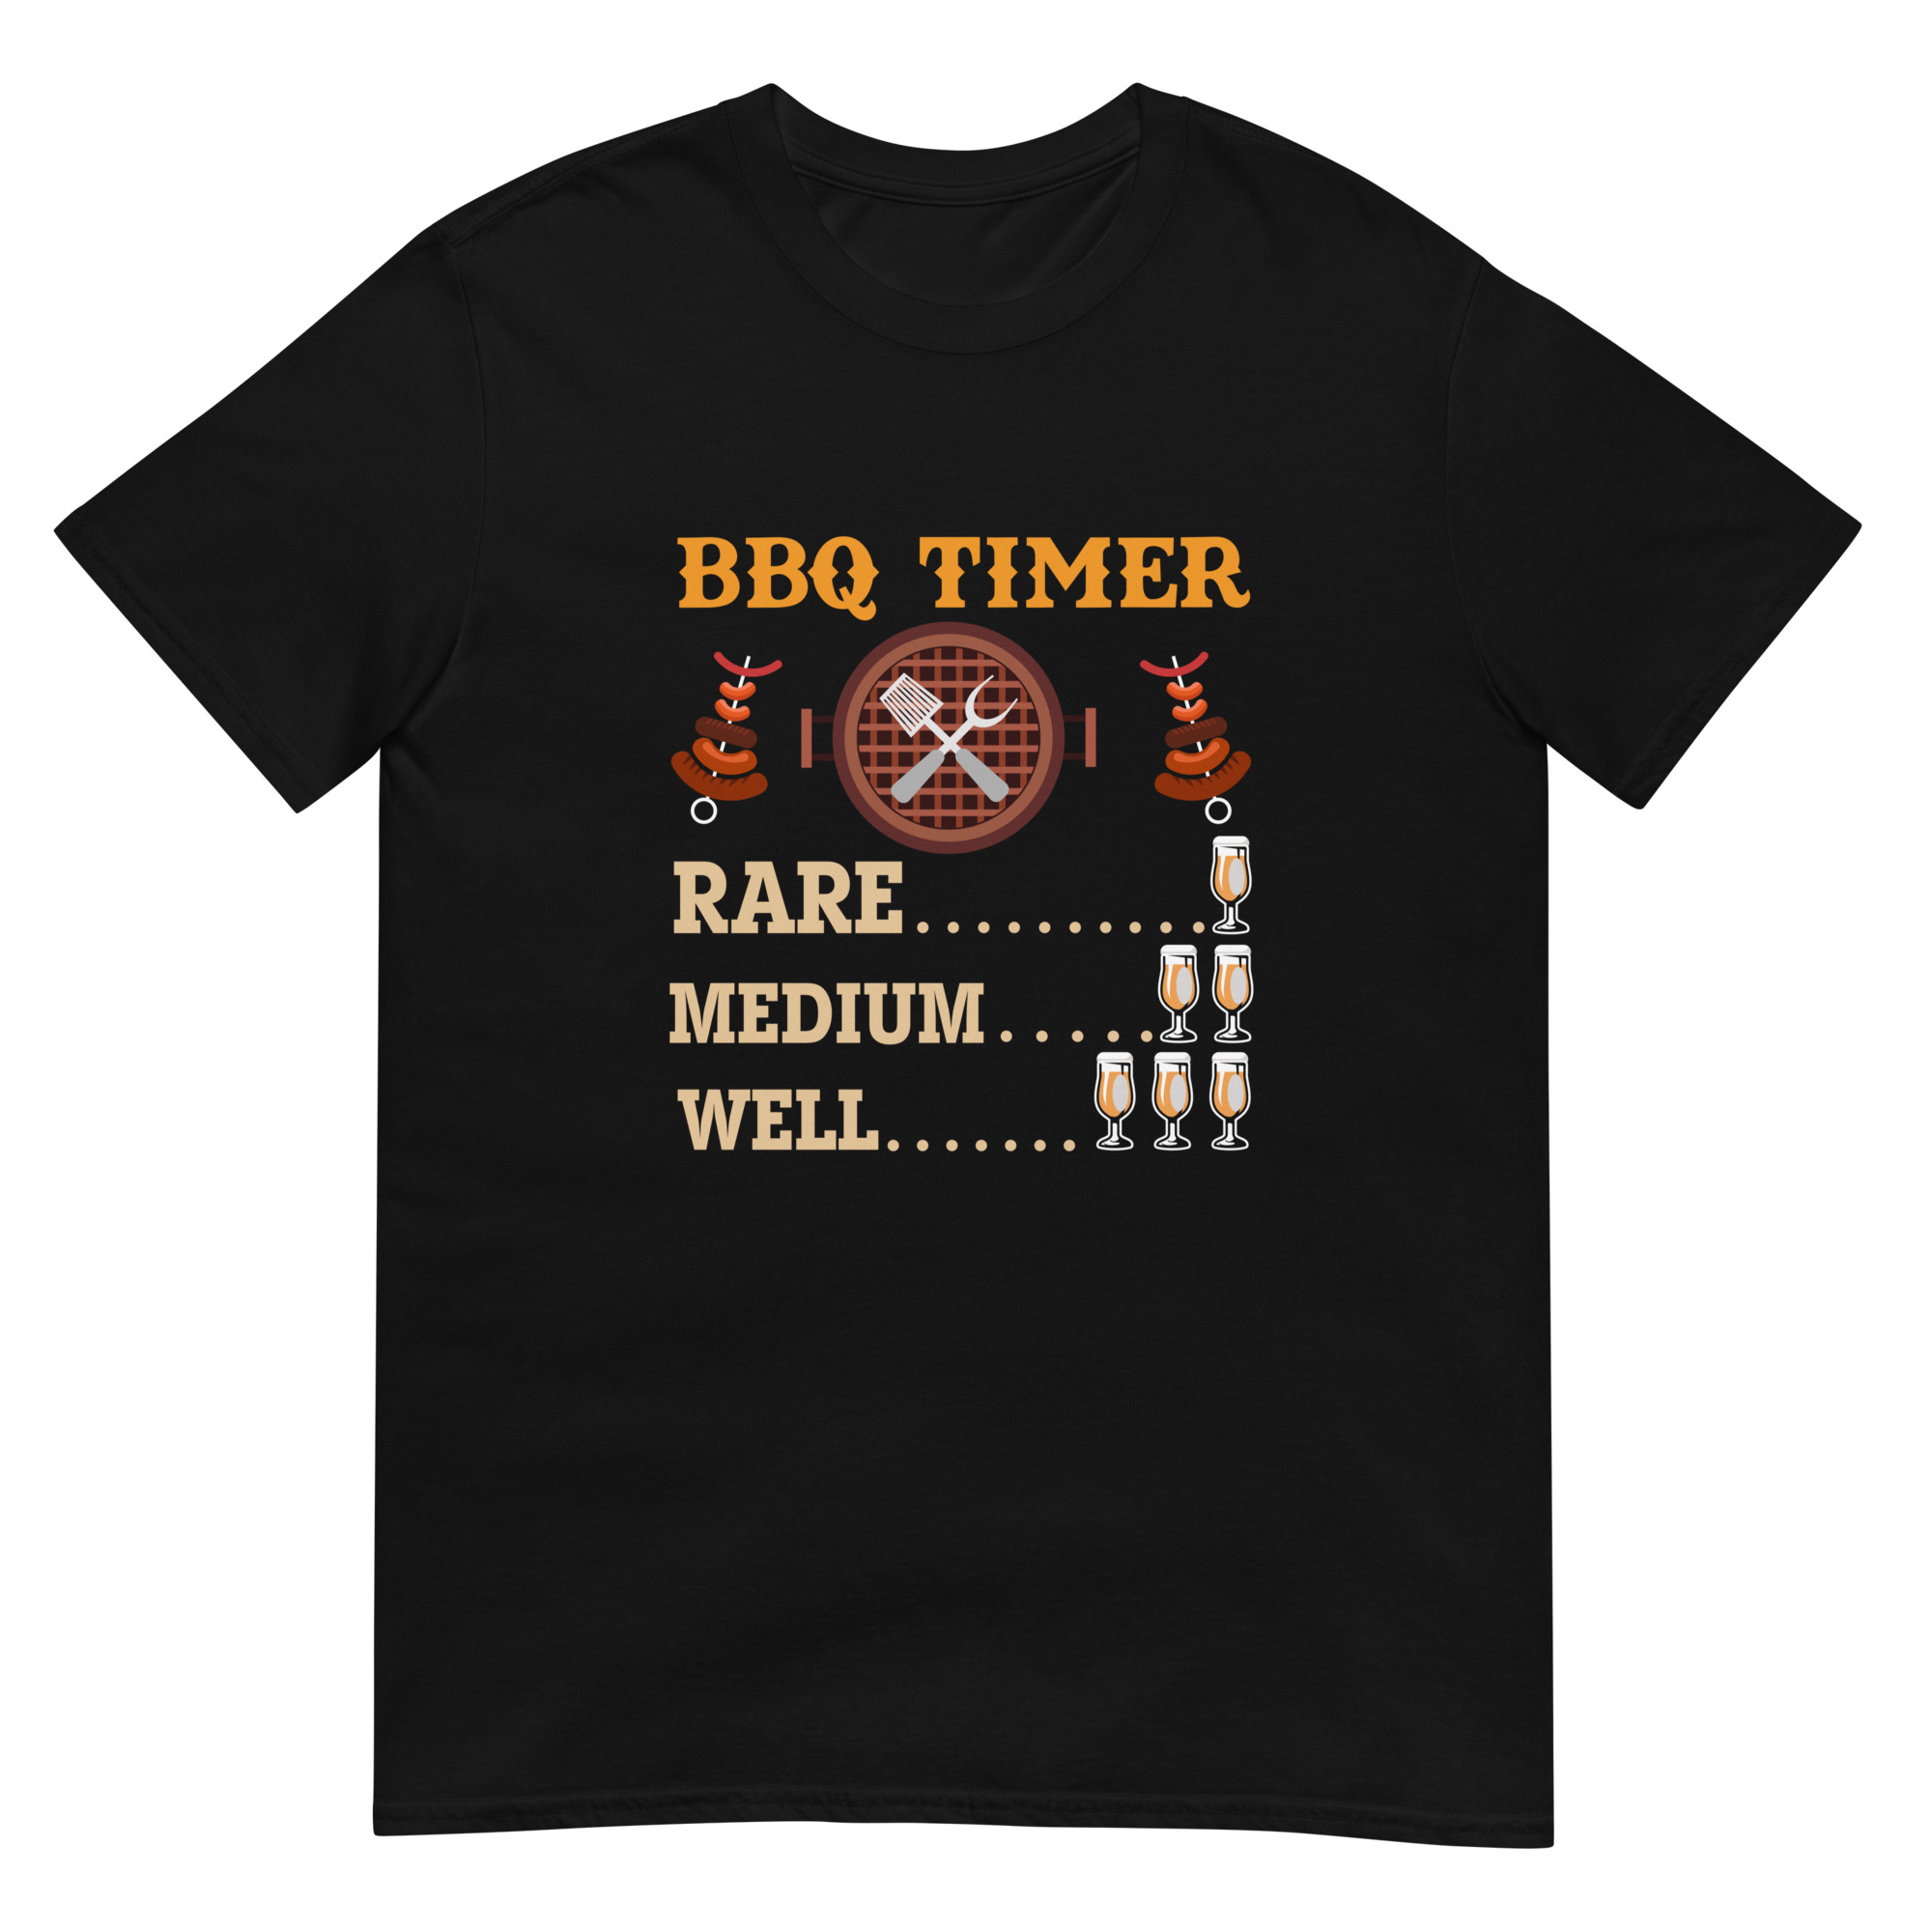 Barbecue Timer Rare Medium Well - Unisex Barbecue T-Shirt